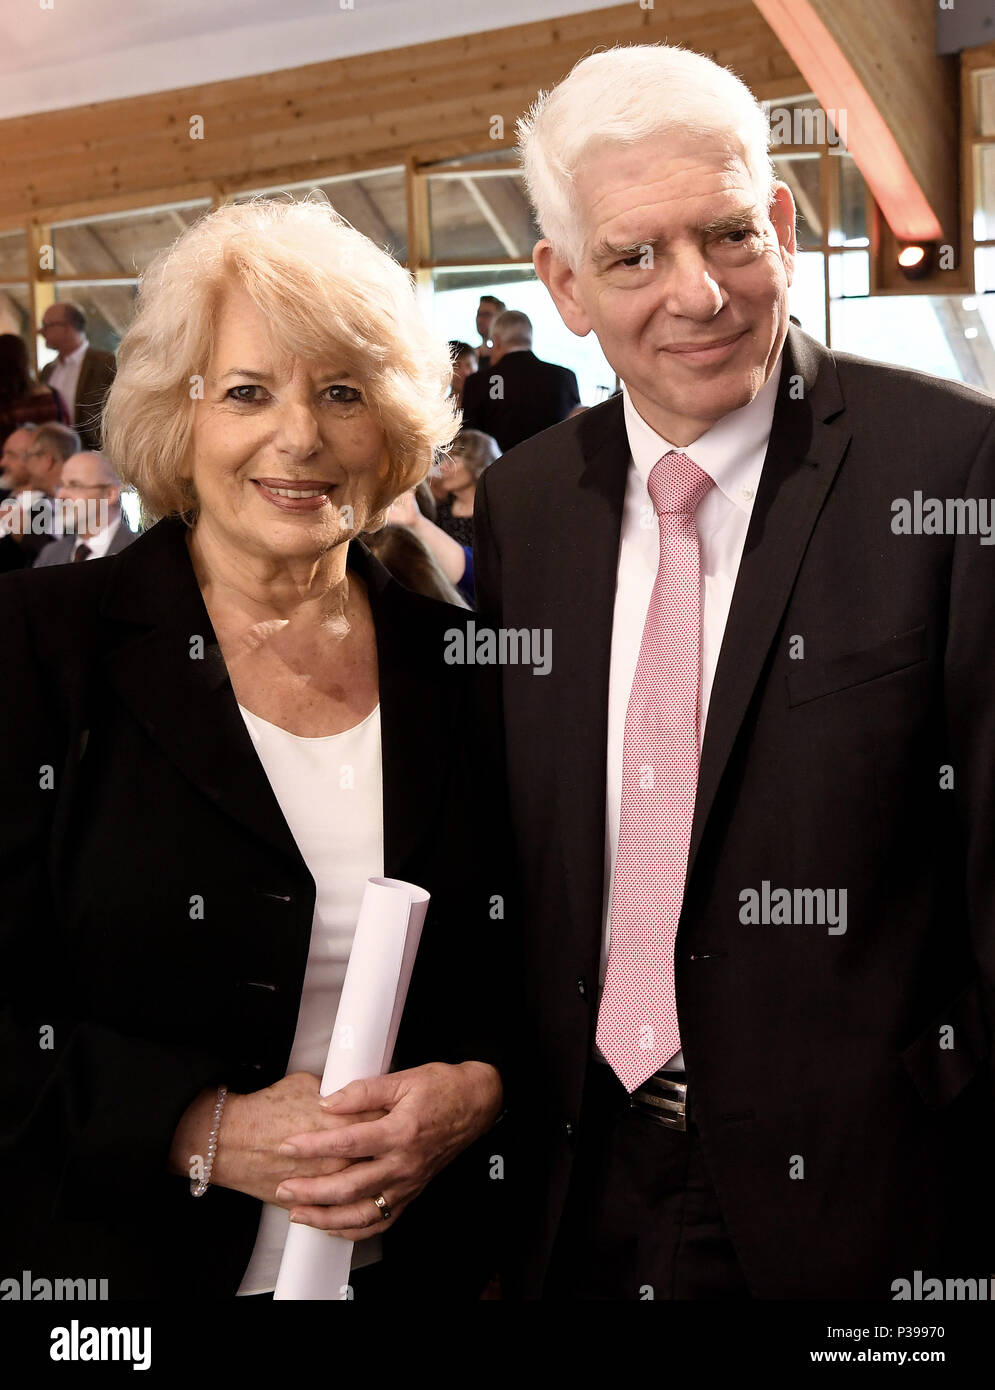 18 June 2018, Hanover, Germany: Josef Schuster (R), president of the Jewish  Central Council and Gisele Spiegel, widow of the former president of the  Jewish Central Council, Paul Spiegel. The central council